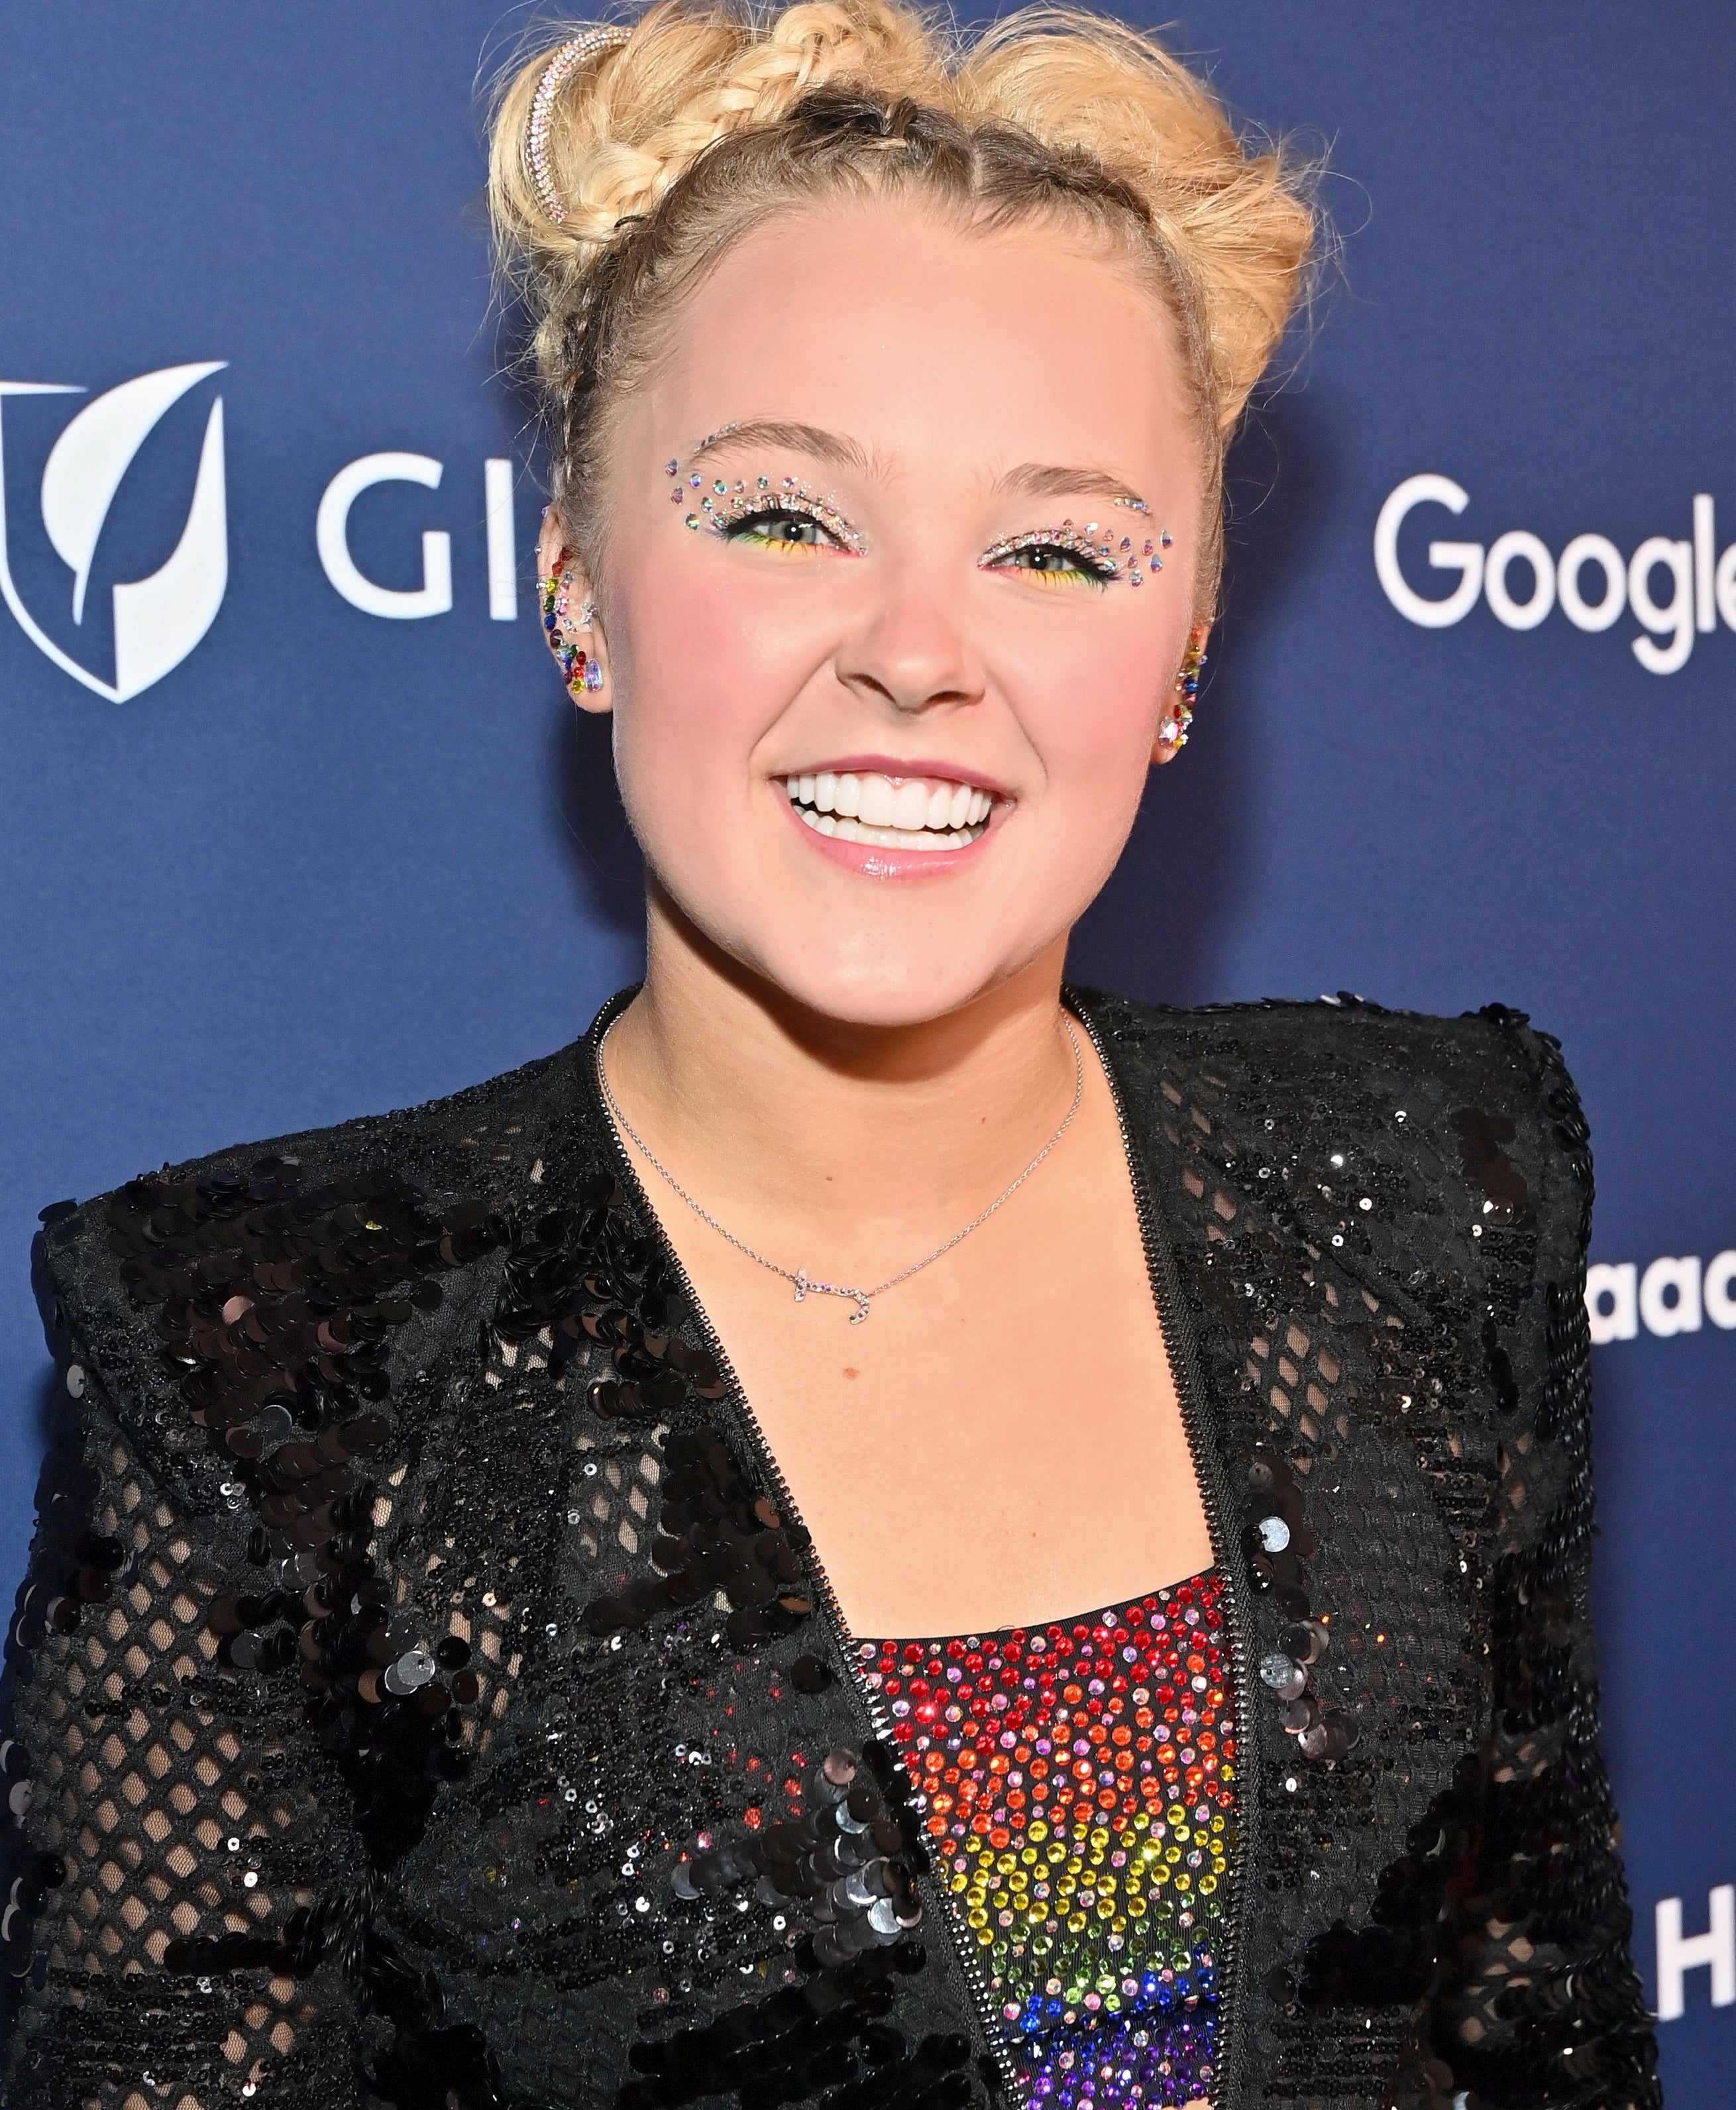 JoJo Siwa attends The 33rd Annual GLAAD Media Awards at The Beverly Hilton on April 02, 2022